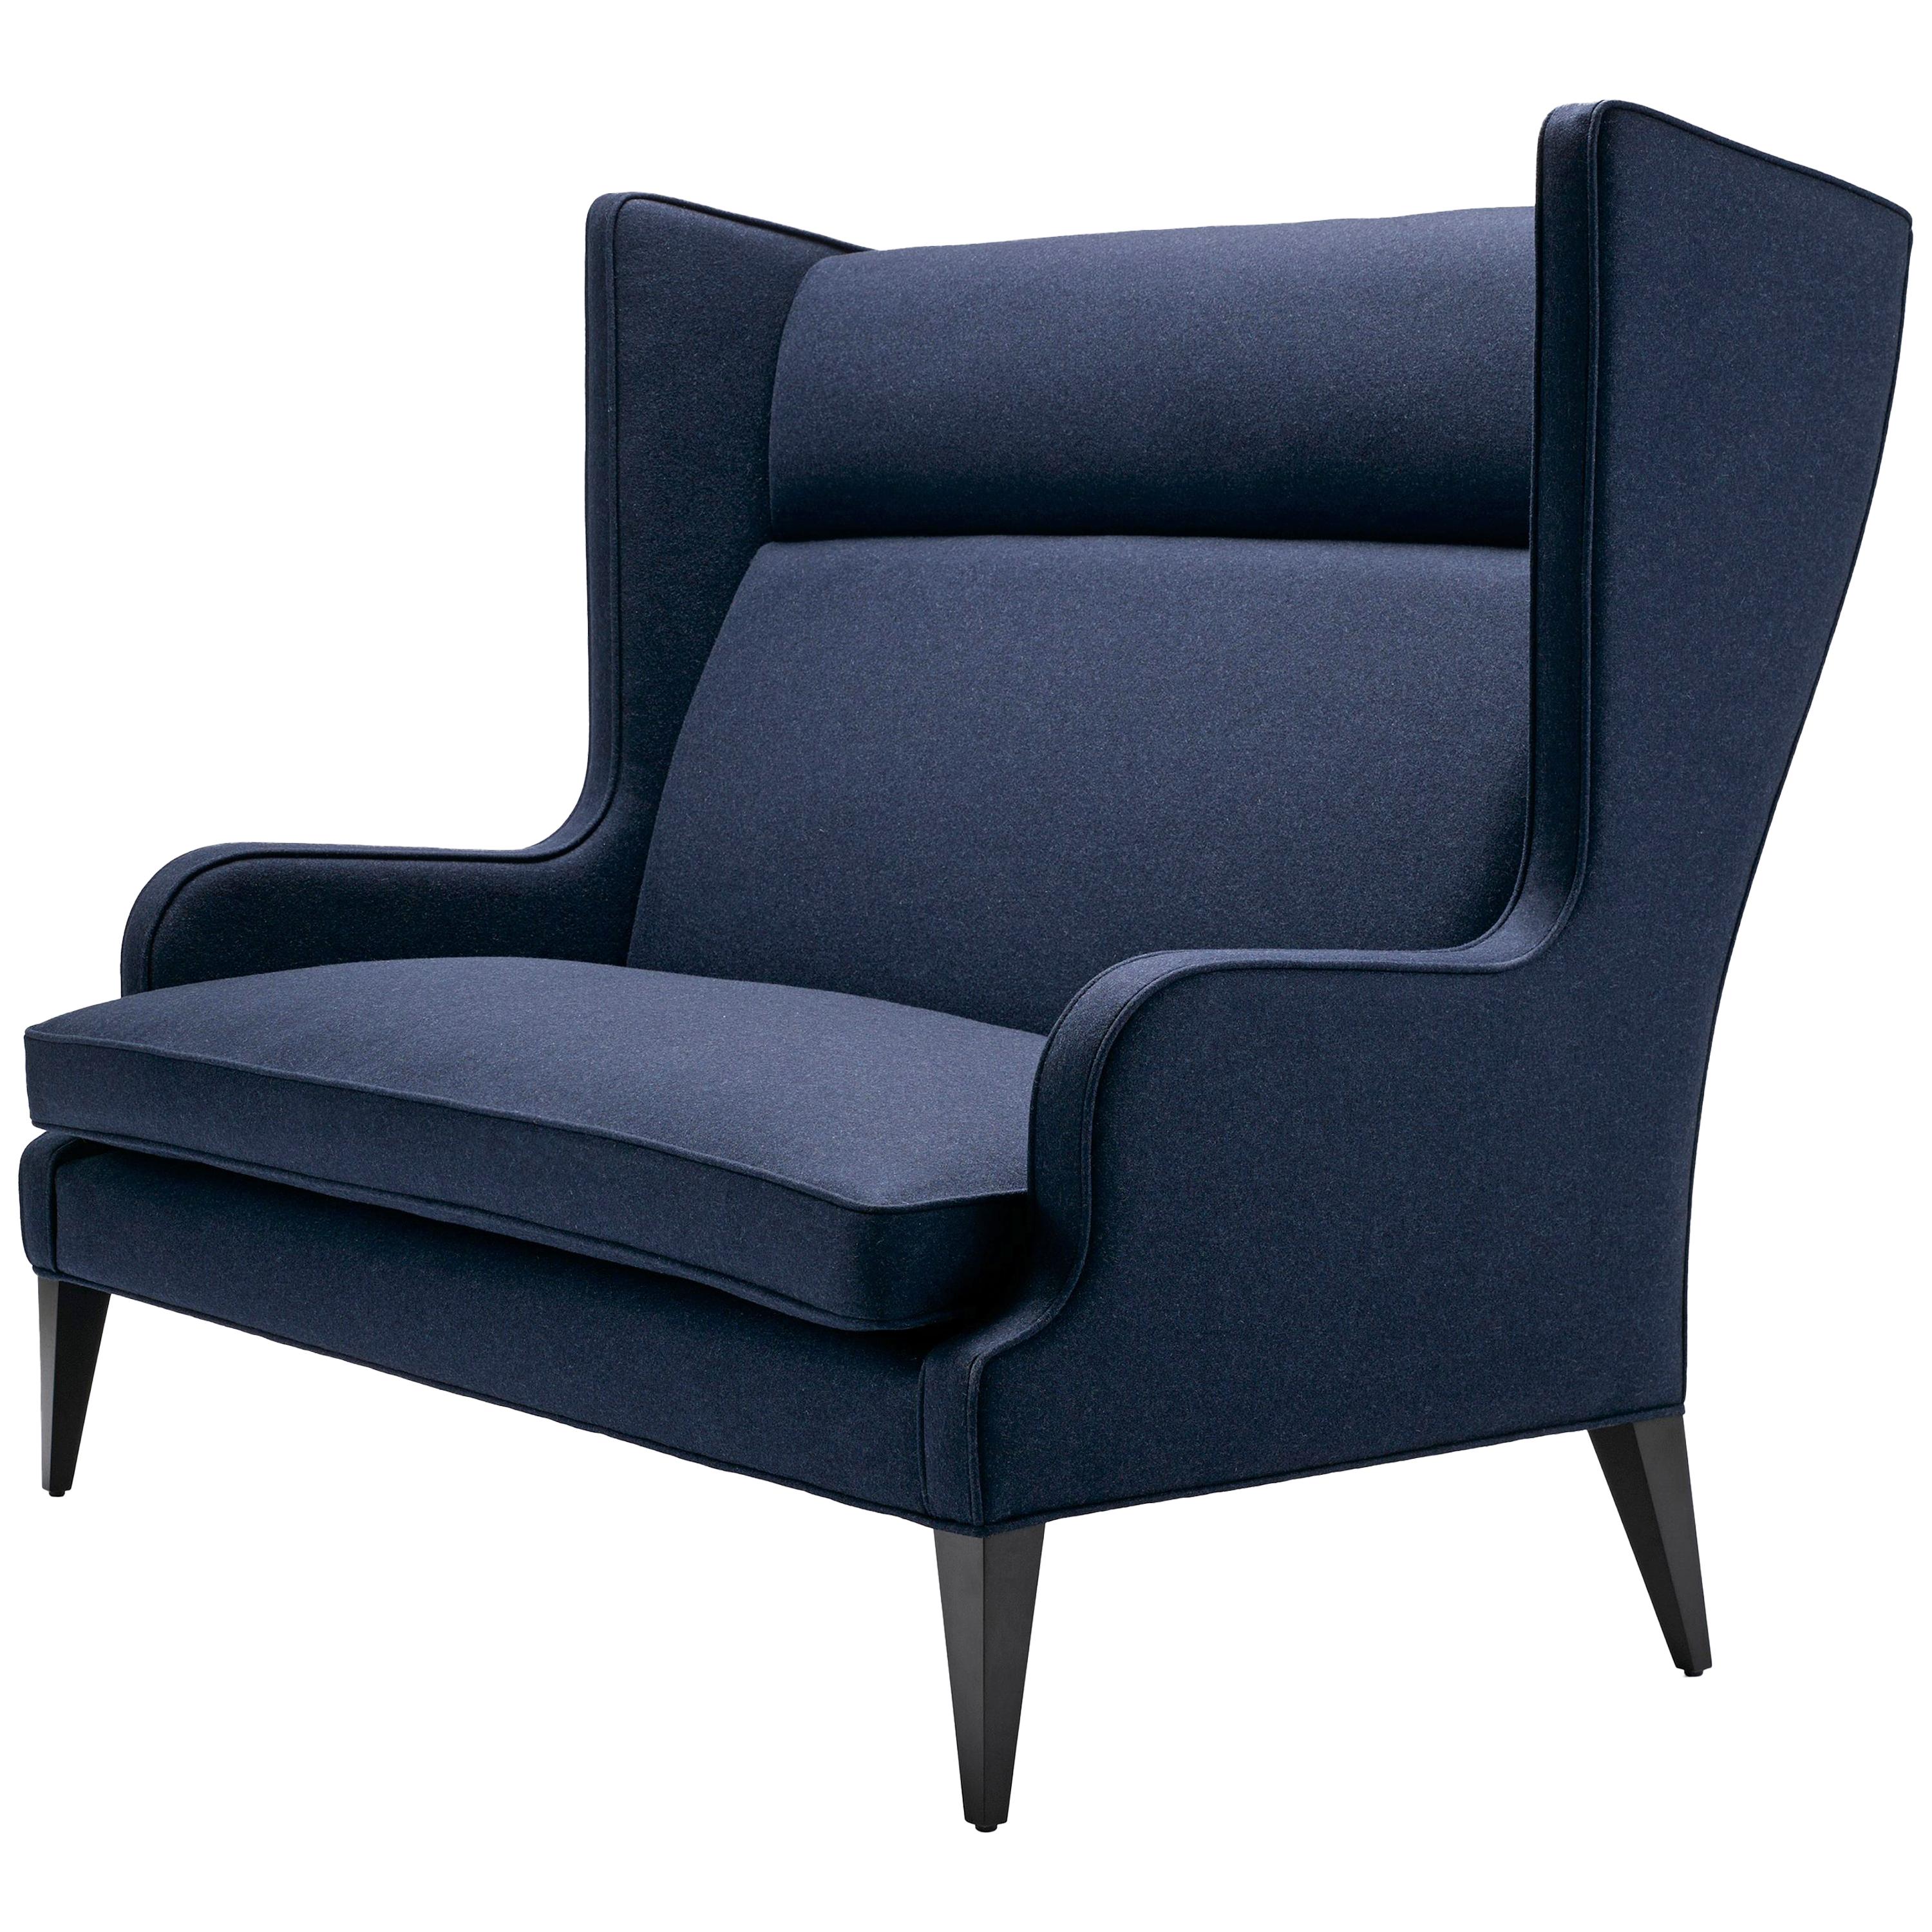 Contemporary Alae Wing Sofa in Navy Melton Wool with Black Walnut Legs For Sale